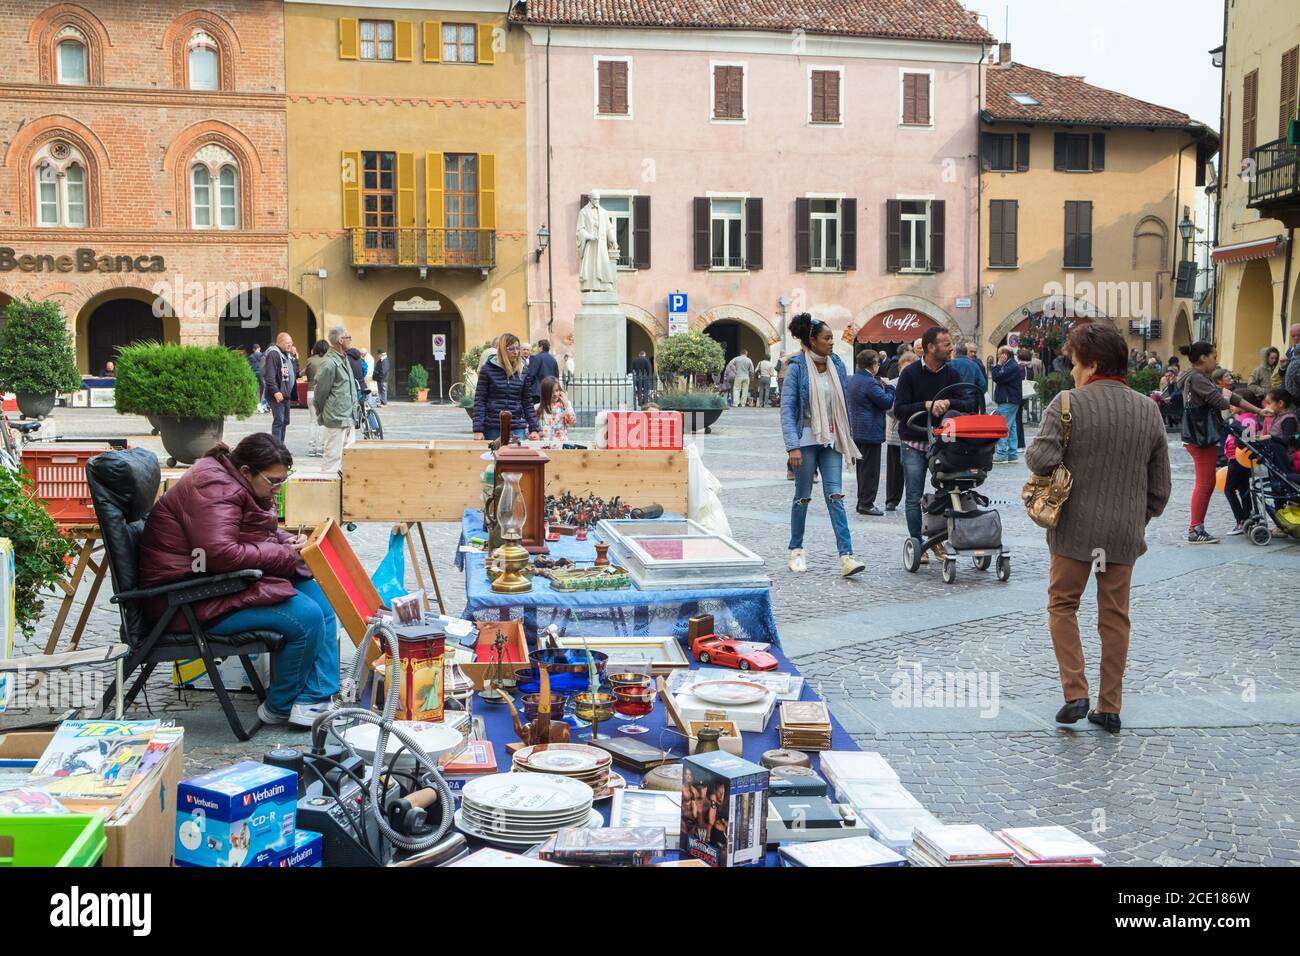 Antiques and collectable market in the small town of Bene Vagienna, Cuneo, Italy Stock Photo